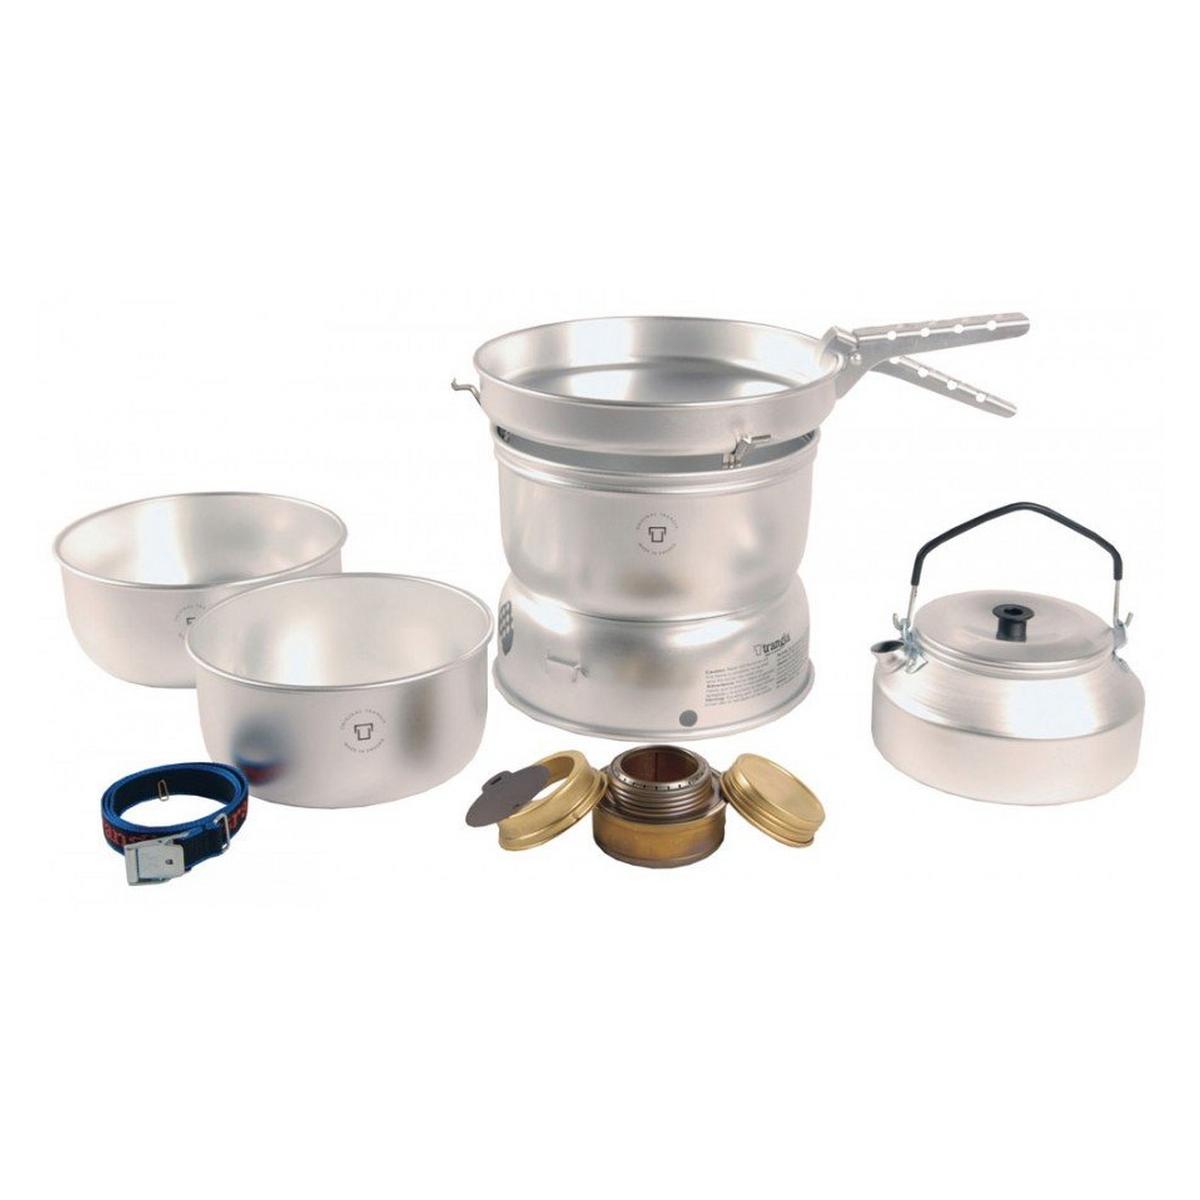 Trangia 25 - 2 UL with Kettle